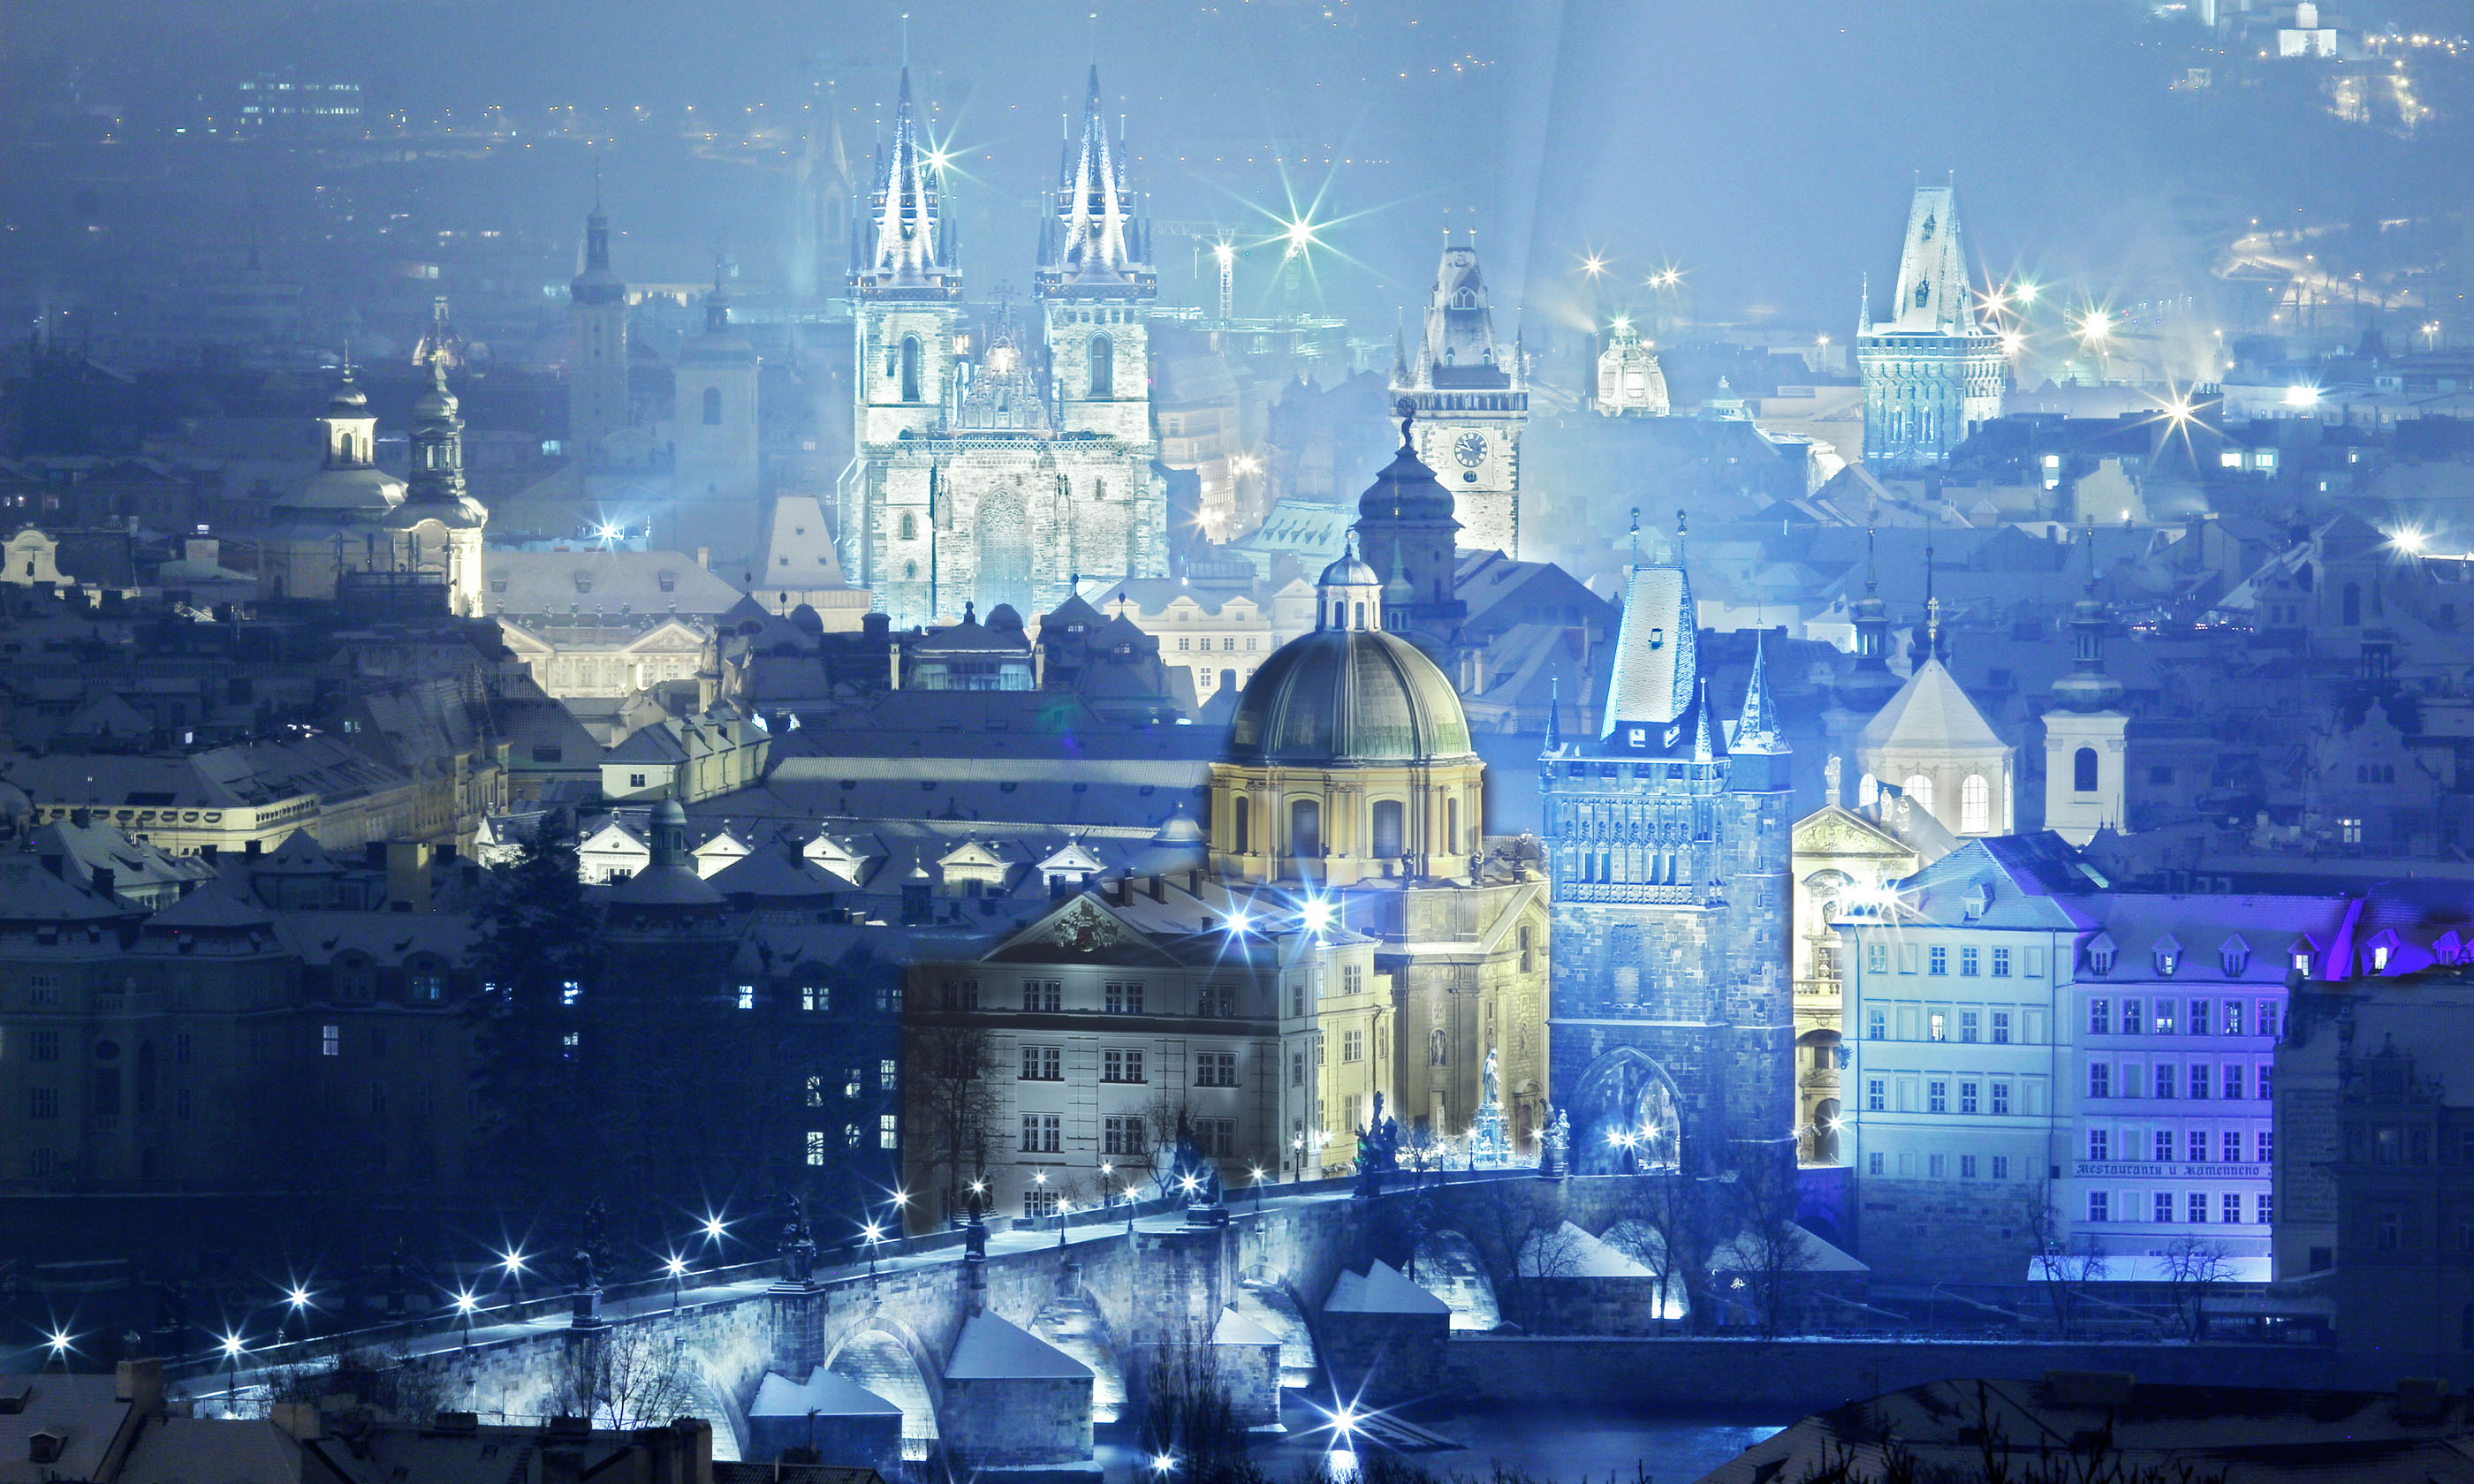 Overview of Prague at night (Shutterstock: see credit below)